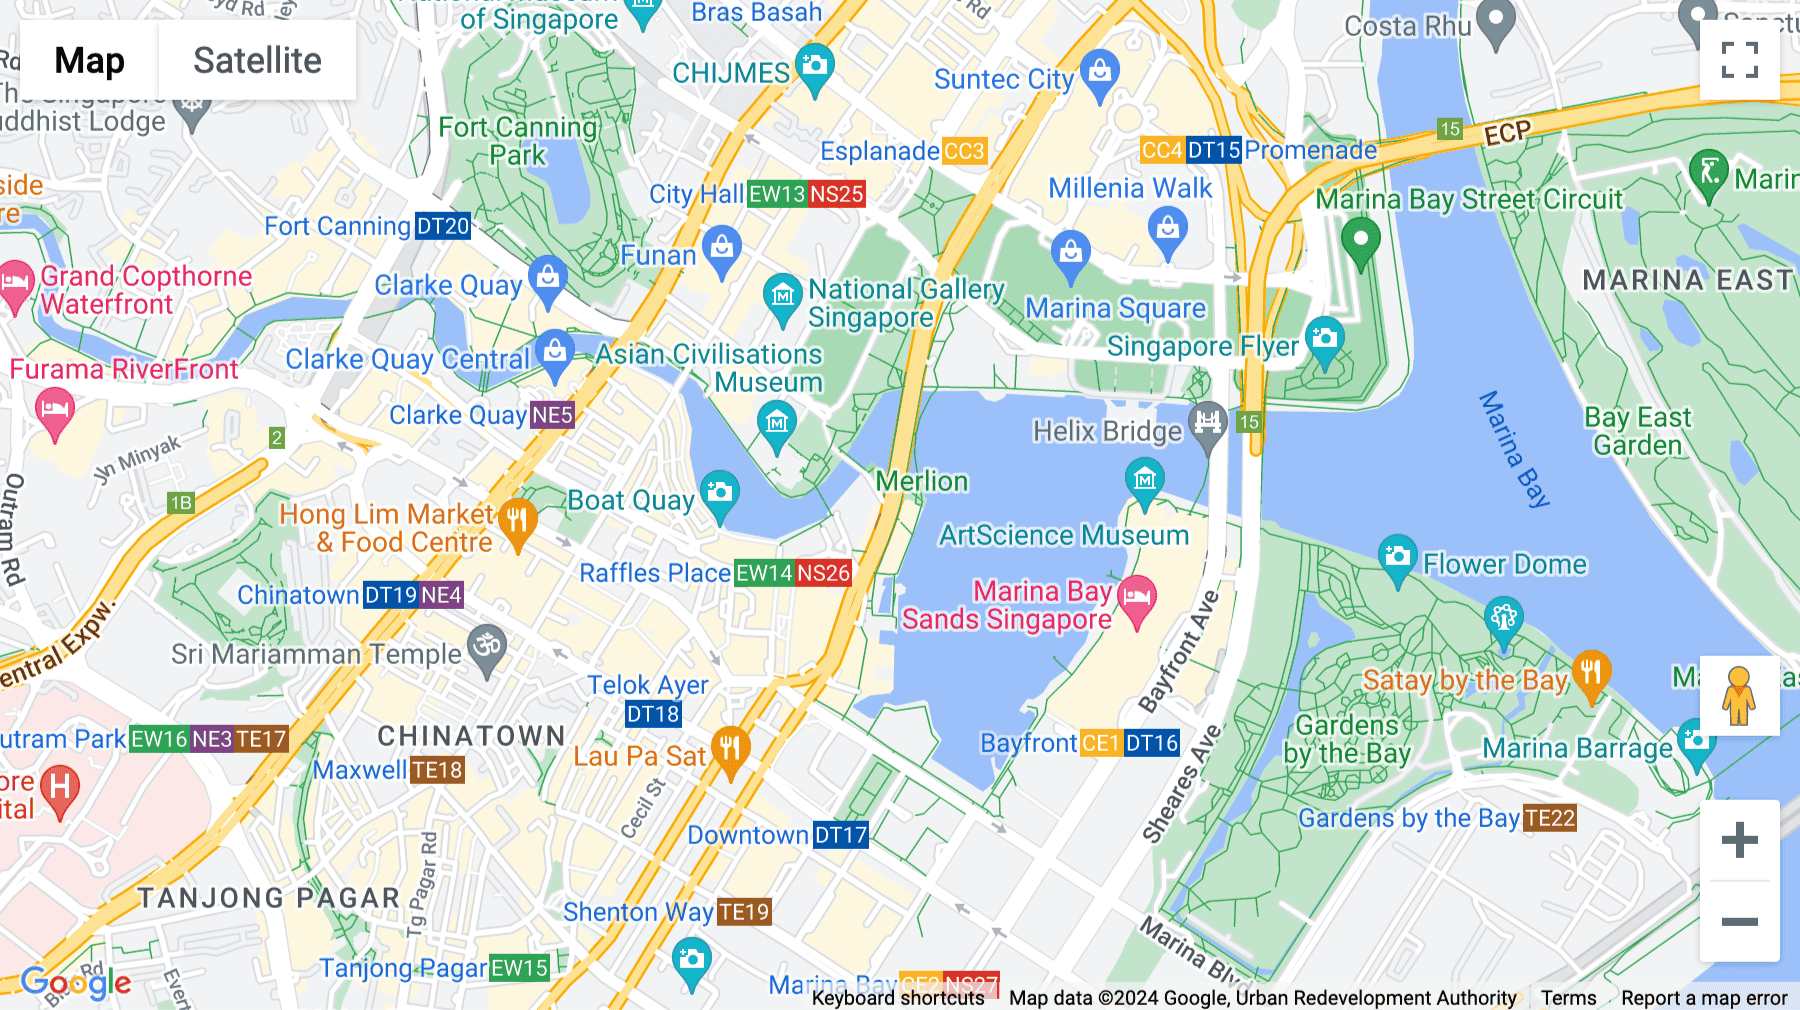 Click for interative map of One Fullerton,1 Fullerton Road 02-01,, Singapore